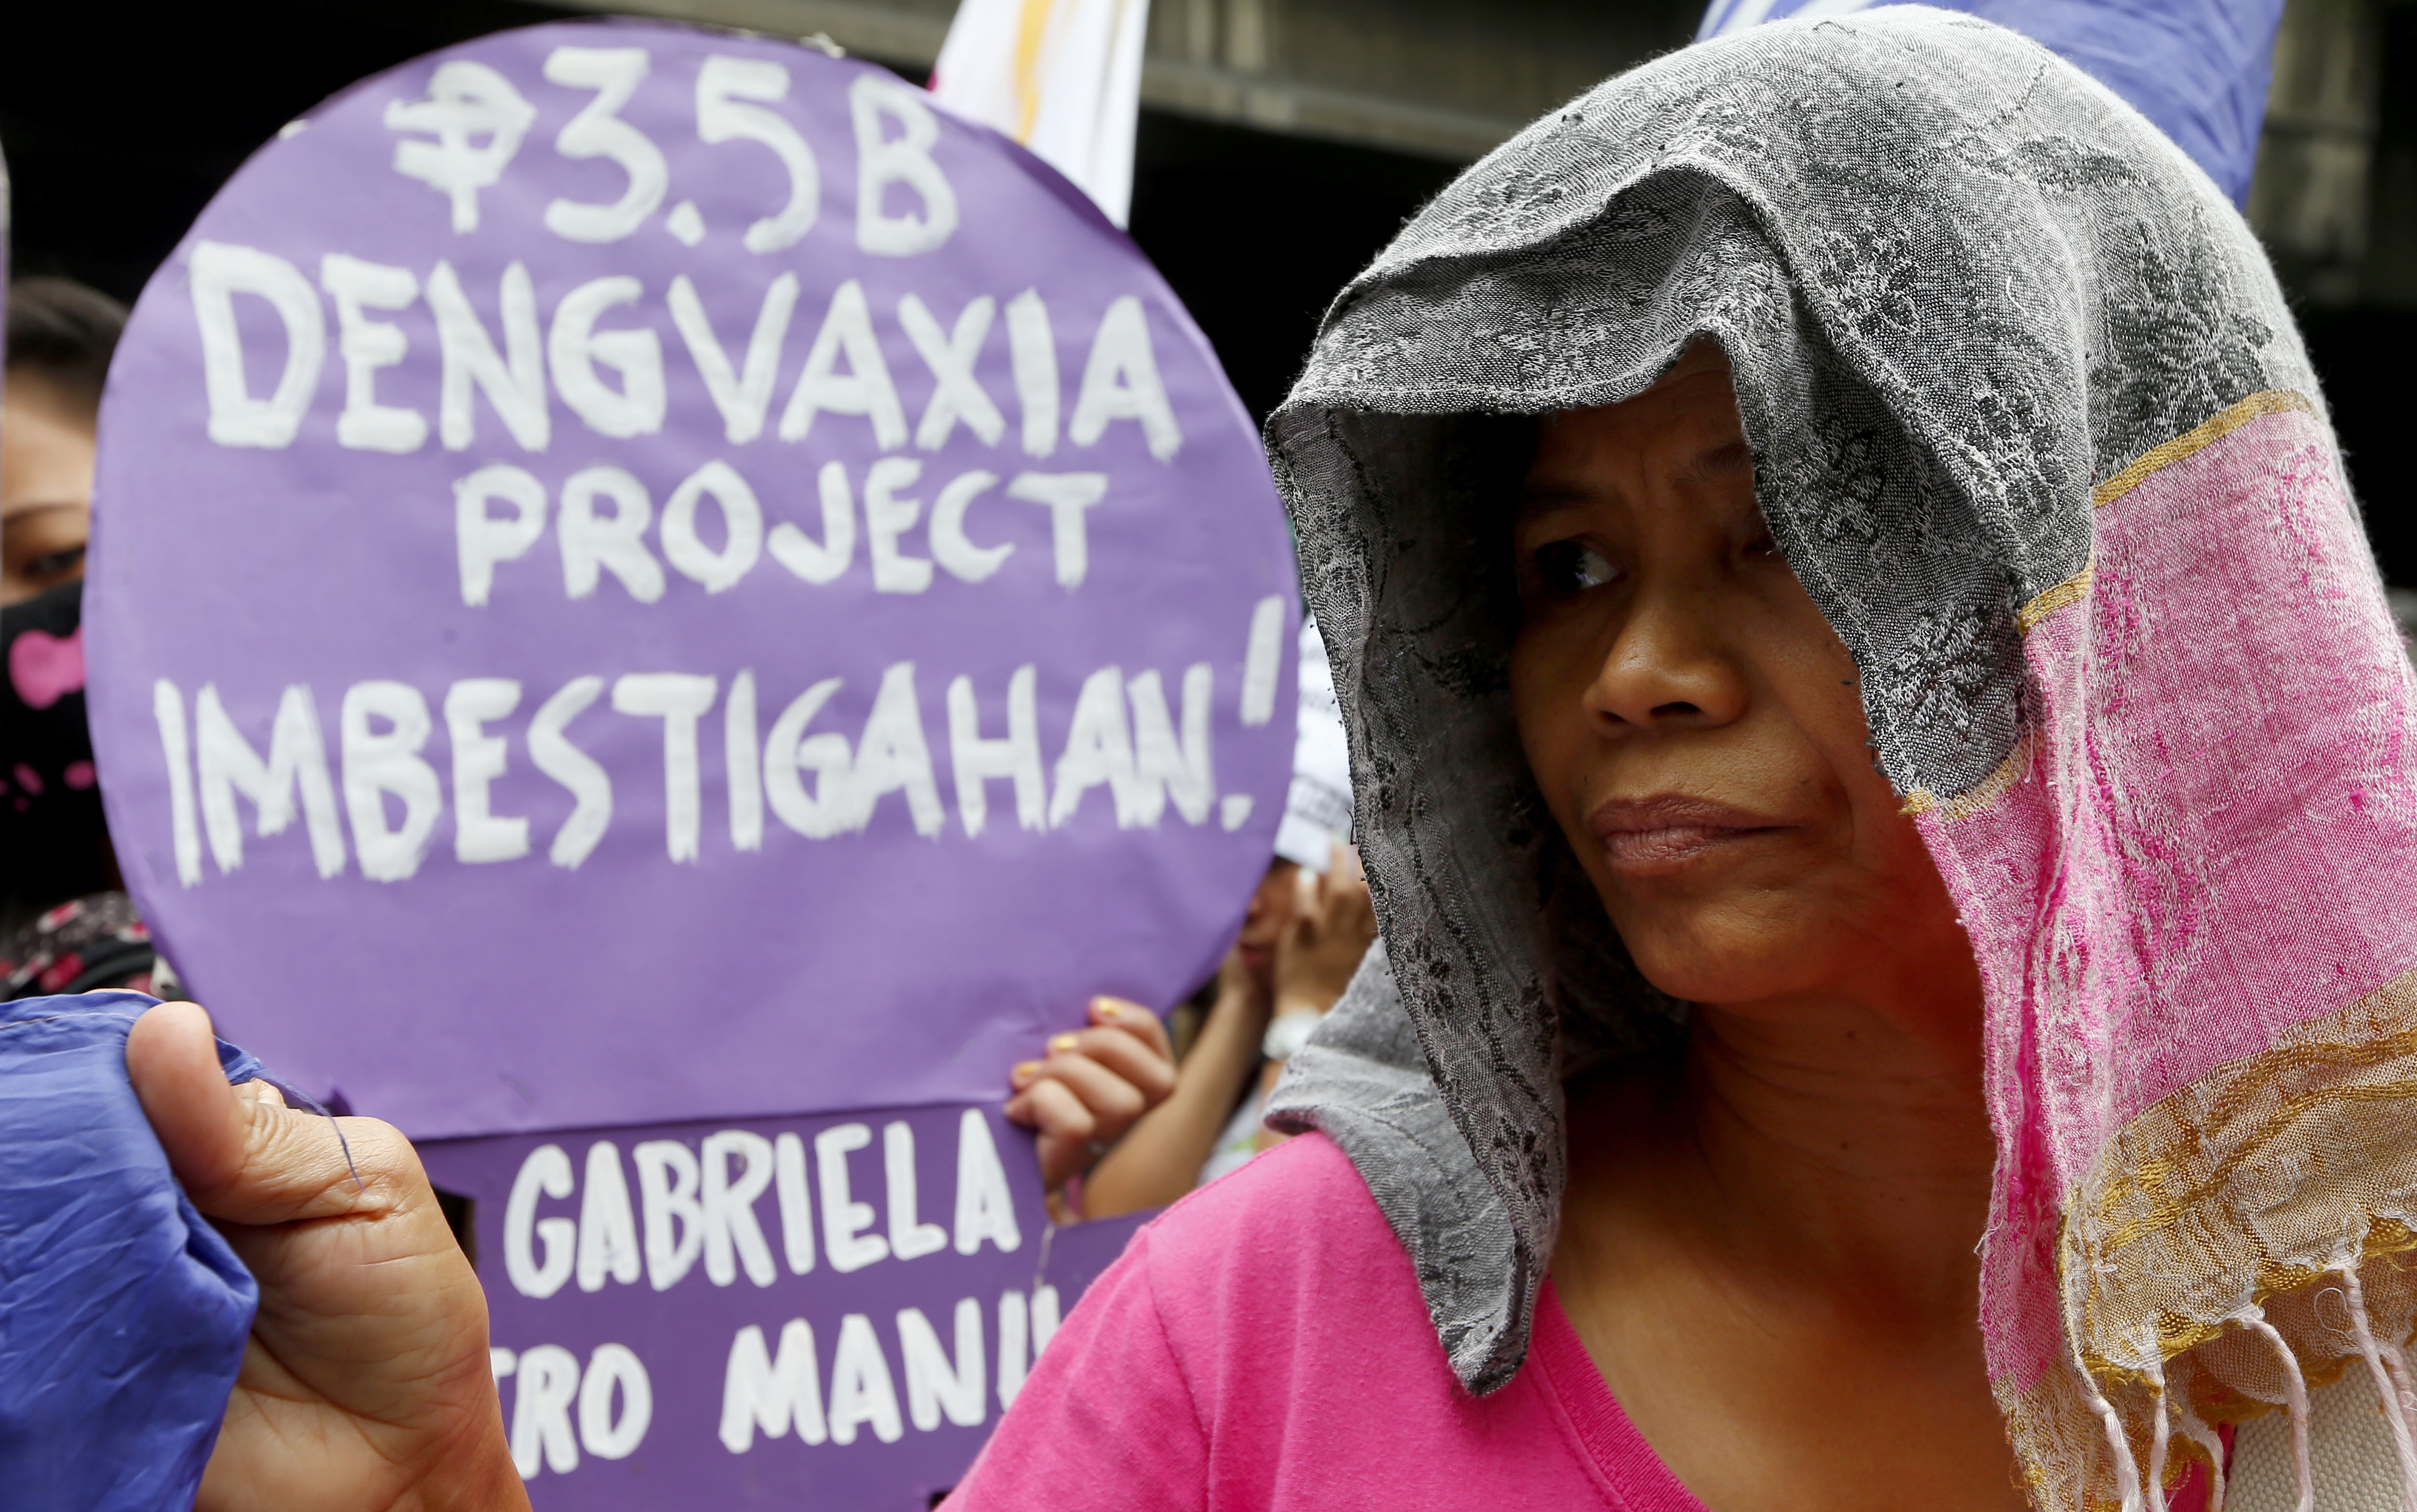 Protesters display placards during a rally outside the Department of Health to demand accountability to Government officials involved in the controversial immunization of  the anti-dengue vaccine Dengvaxia to more than 700,000 Filipino children Tuesday, Dec. 5, 2017 in Manila, Philippines. The controversial vaccine, manufactured by Sanofi Pasteur was put on hold by the Philippines last week after new study findings showed it posed risks of severe cases in people without previous infection. The drug was recalled Tuesday from local health centers. The sign reads: Investigate The 3.5 Billion-Peso Dengvaxia Project.! (AP Photo/Bullit Marquez)